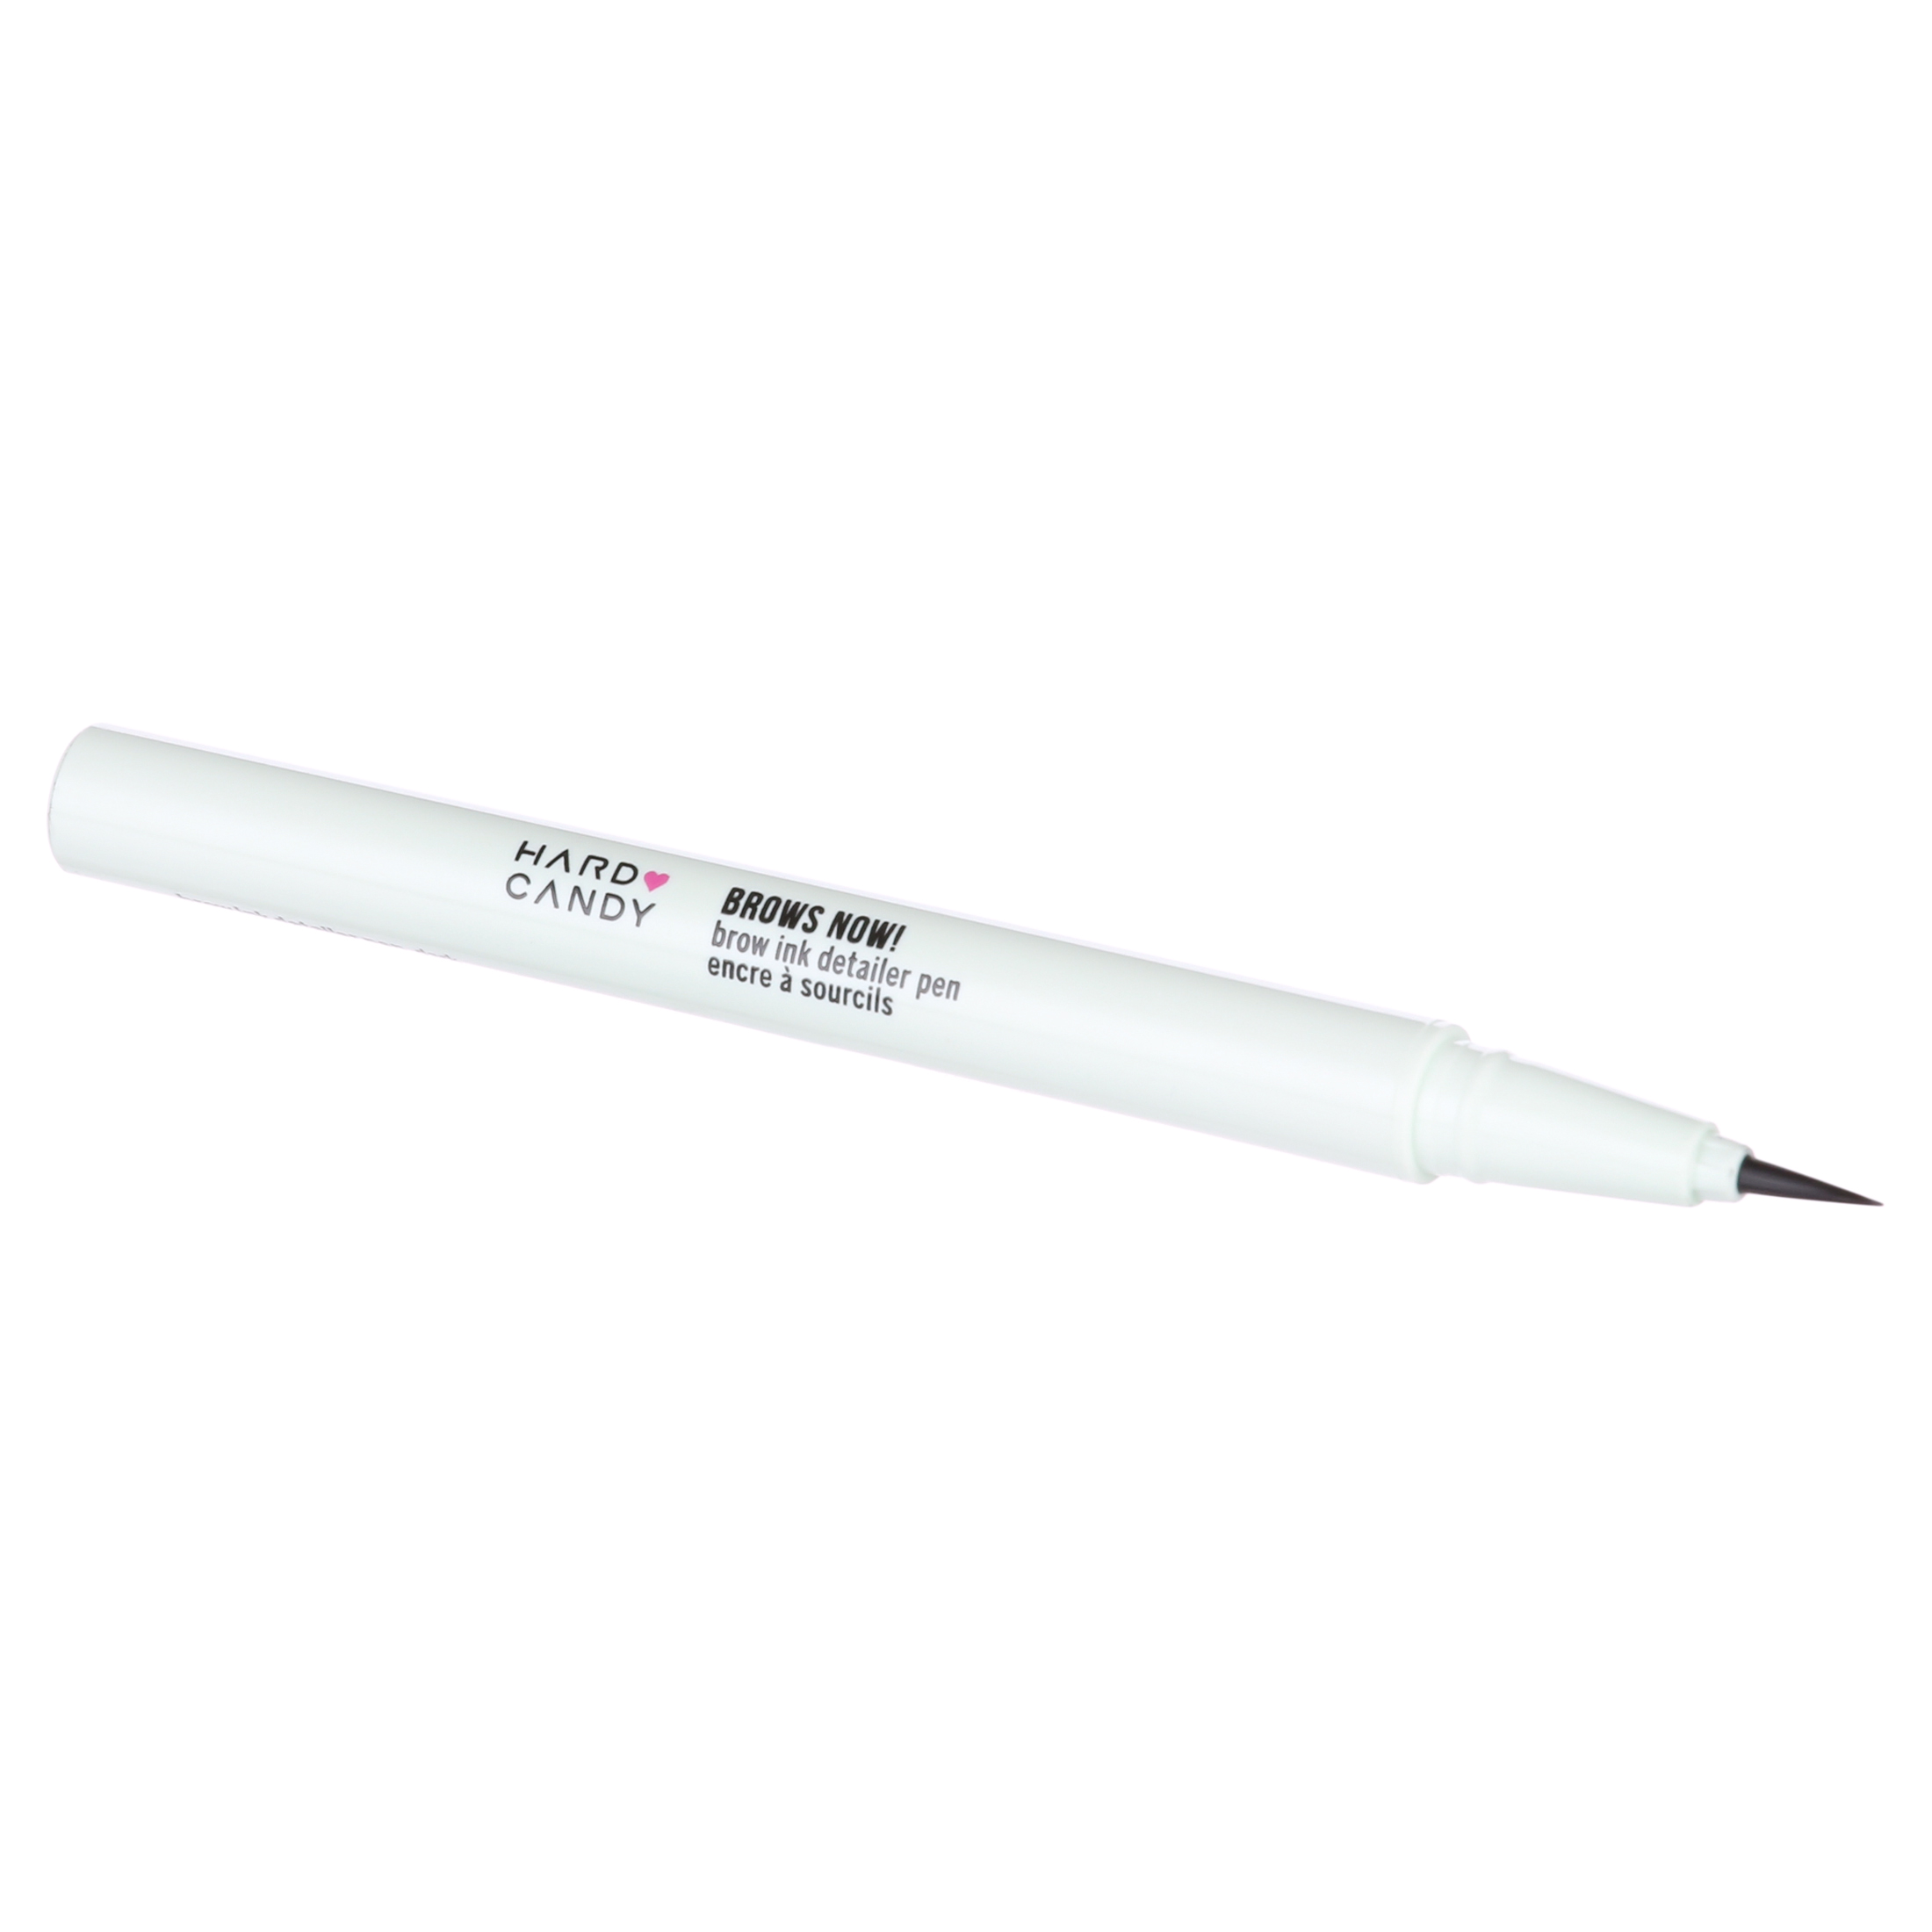 Hard Candy Brows Now! Precision Tip Brow Ink Medium/Dark - image 5 of 7